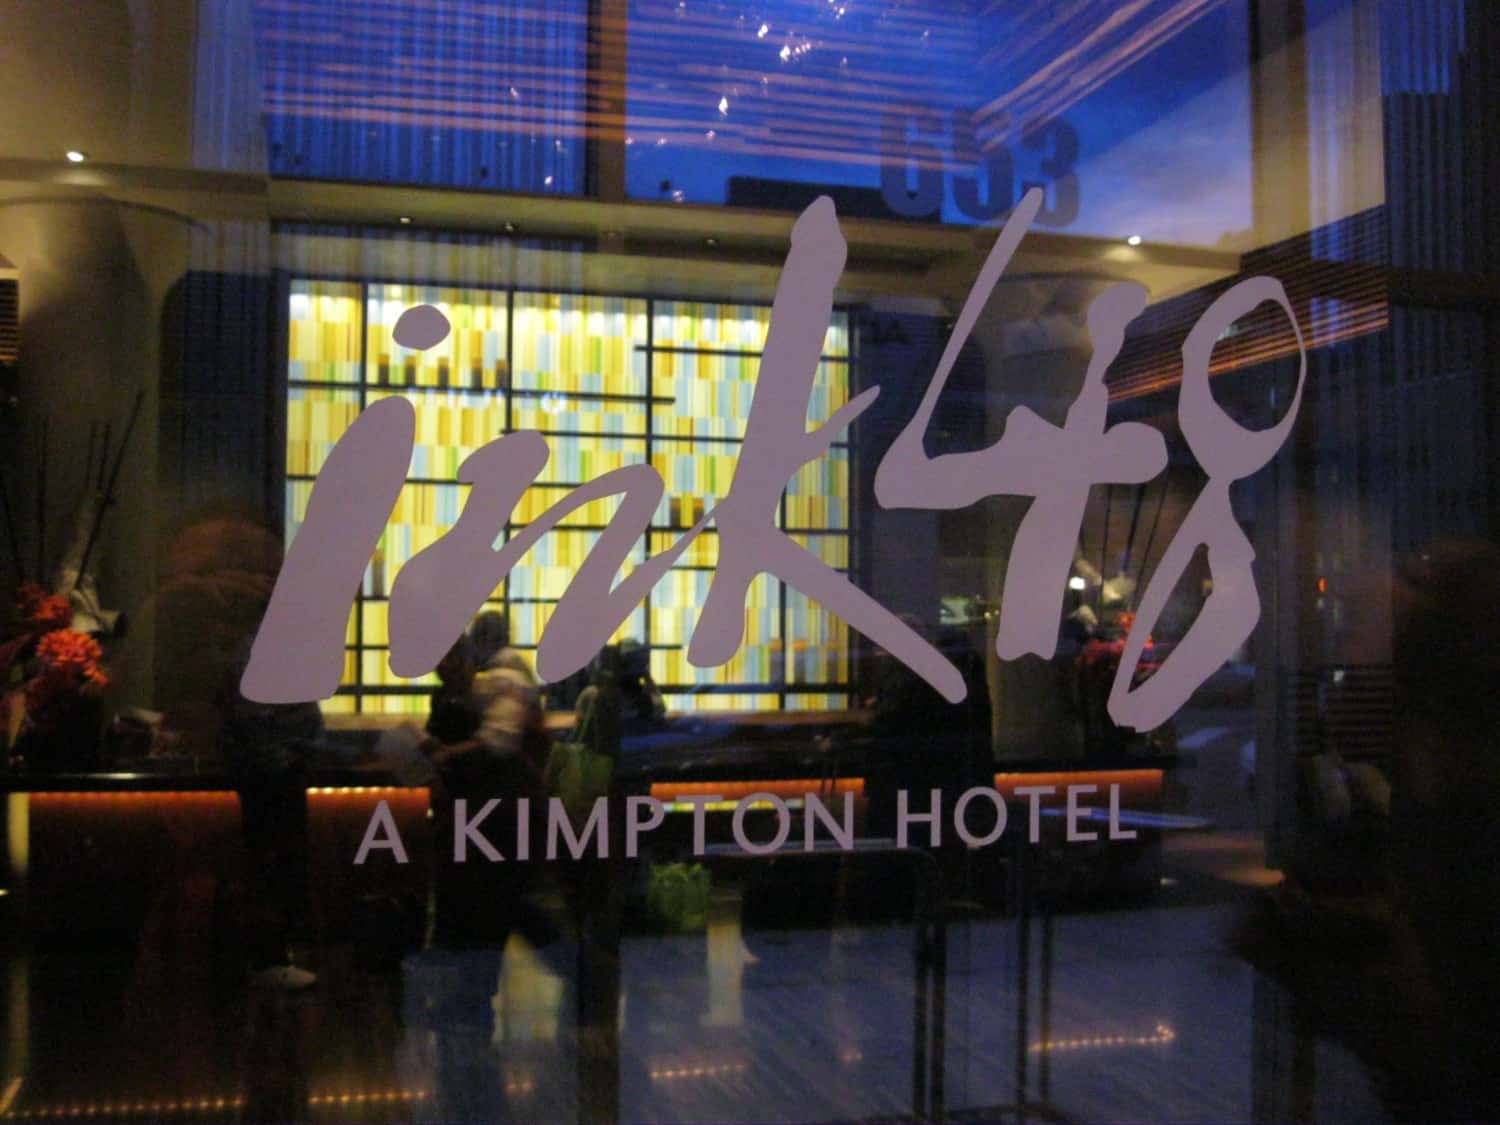  Ink 48 in New York - a Kimpton Hotel. Among the pet-friendly hotel chains where family pets remain complimentary!